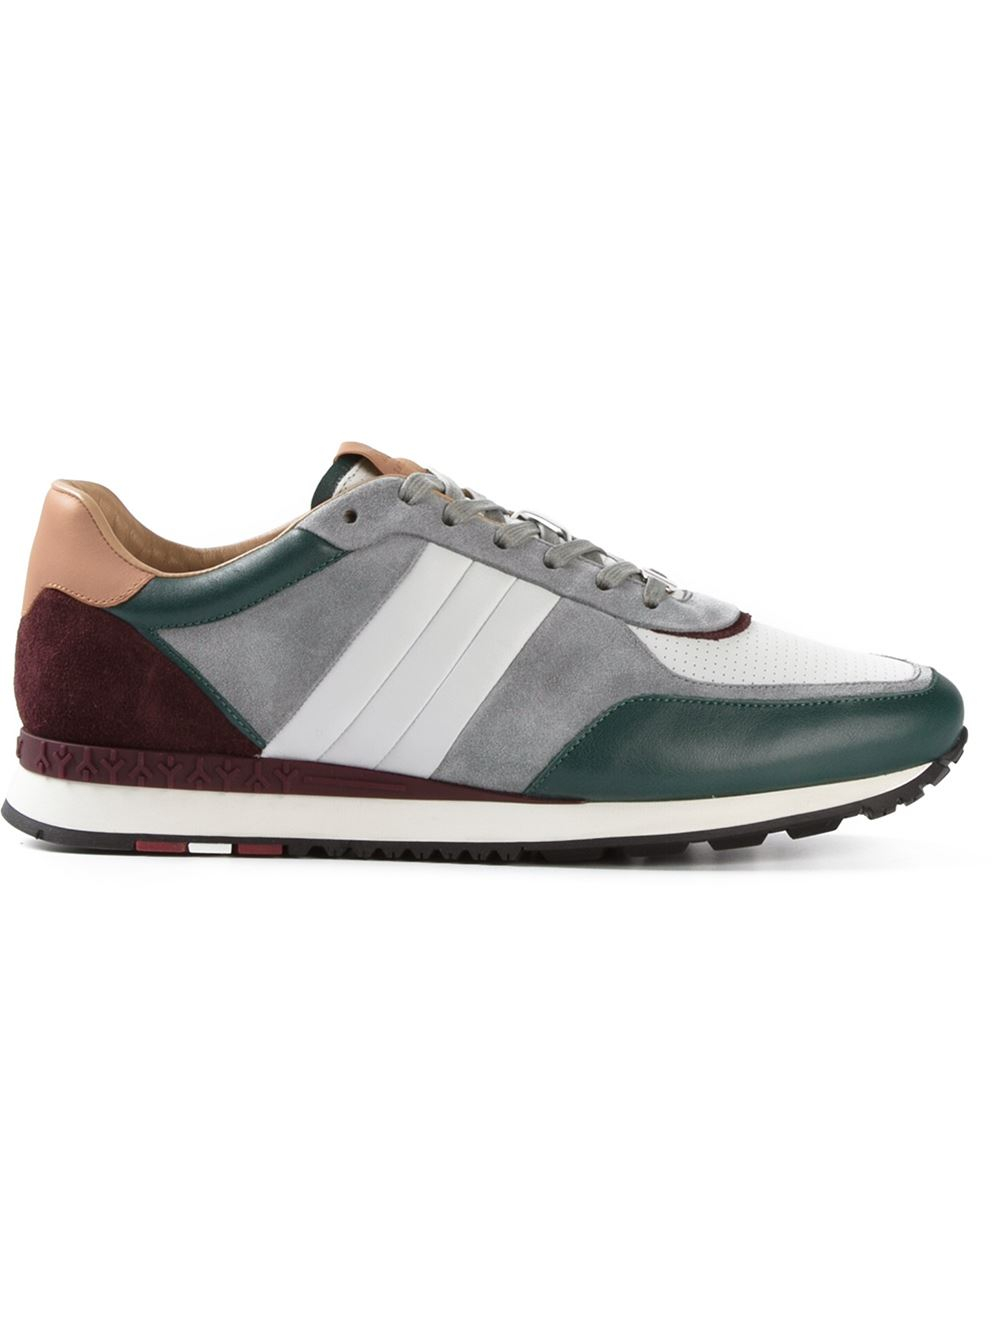 mens bally trainers